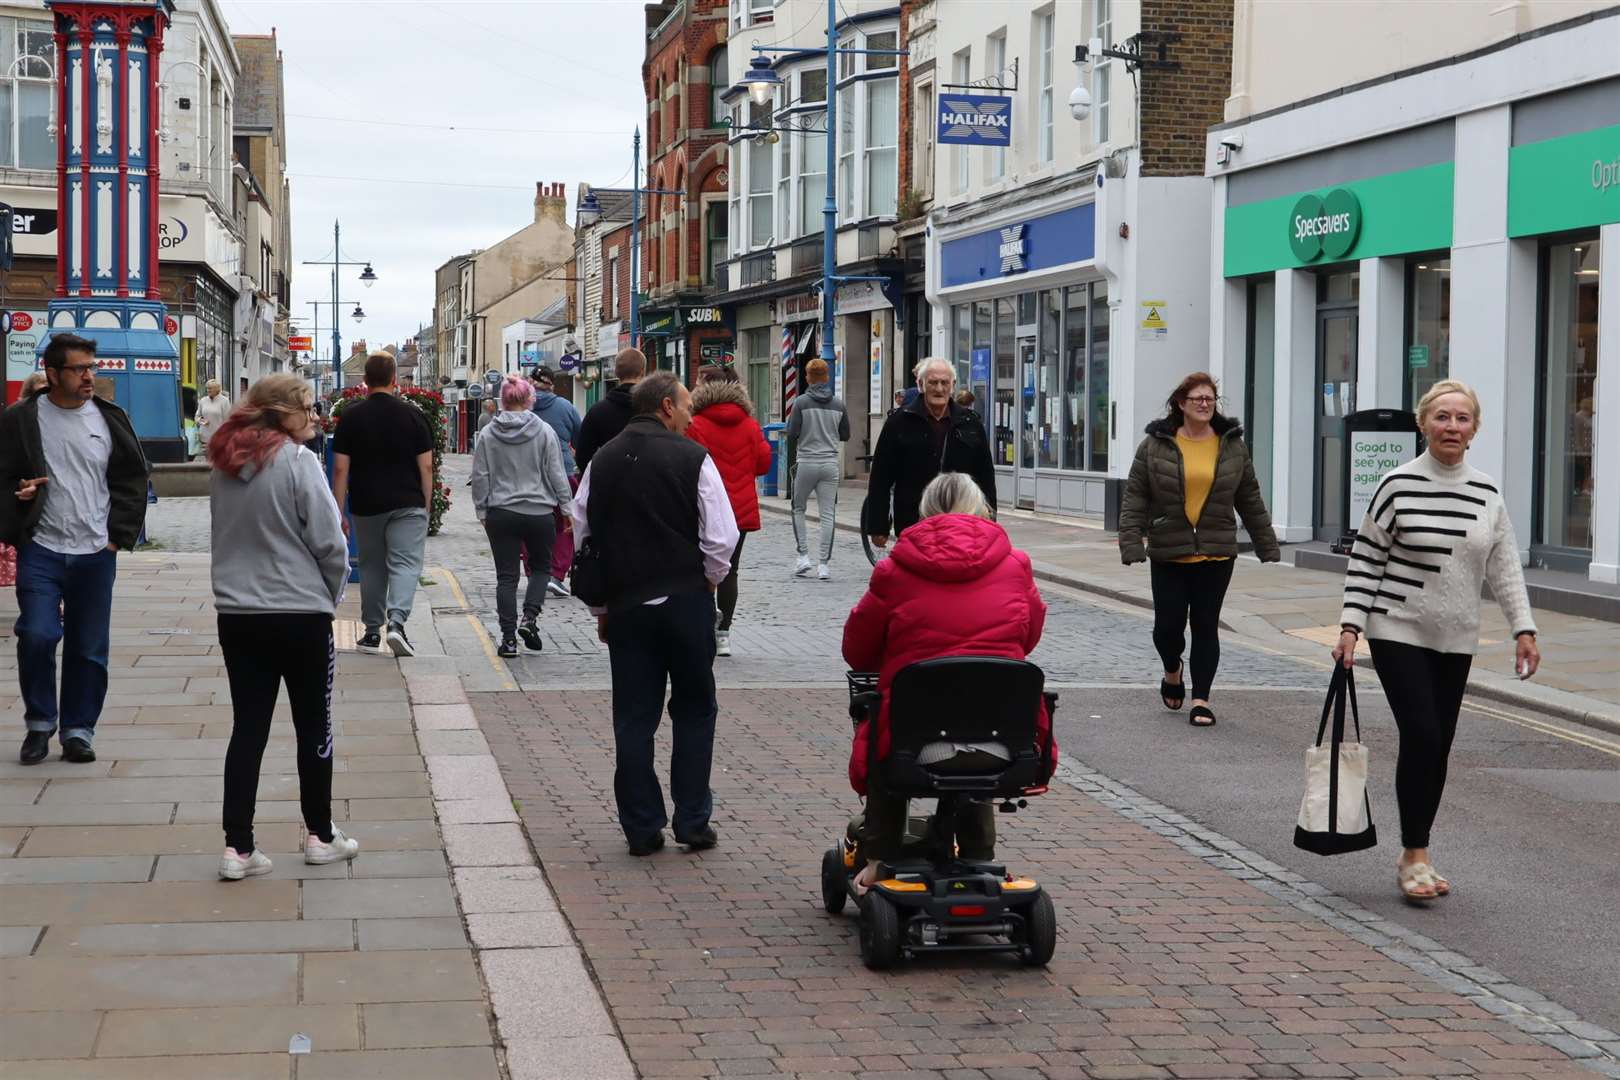 Shoppers in Sheerness have welcomed the pedestrianisation of the High Street because they say it is safer and less polluted. But traders are feeling the pinch